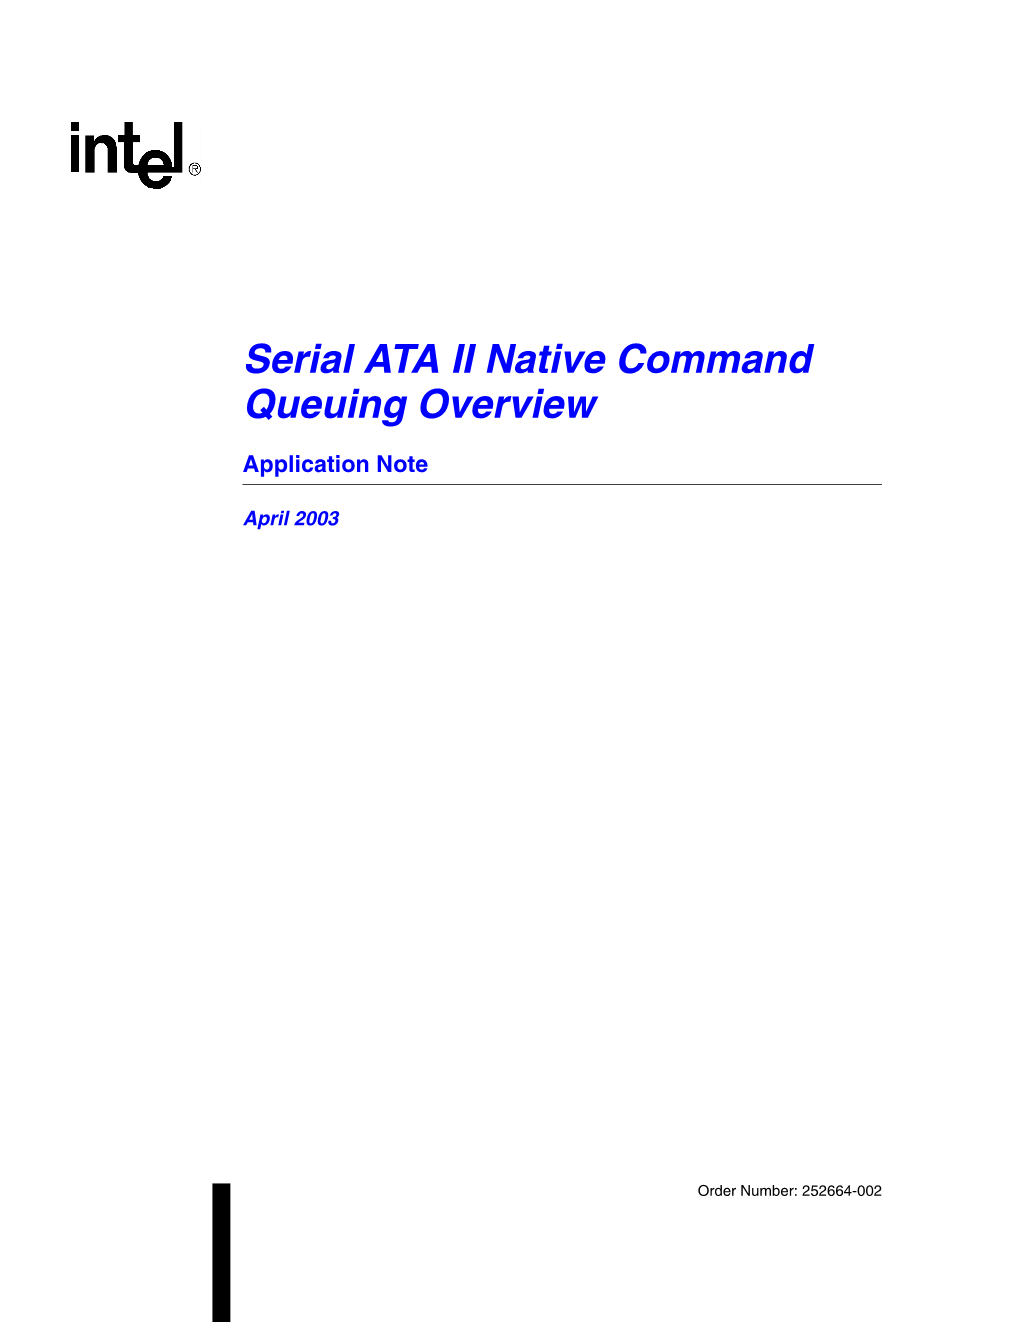 Serial ATA II Native Command Queuing Overview